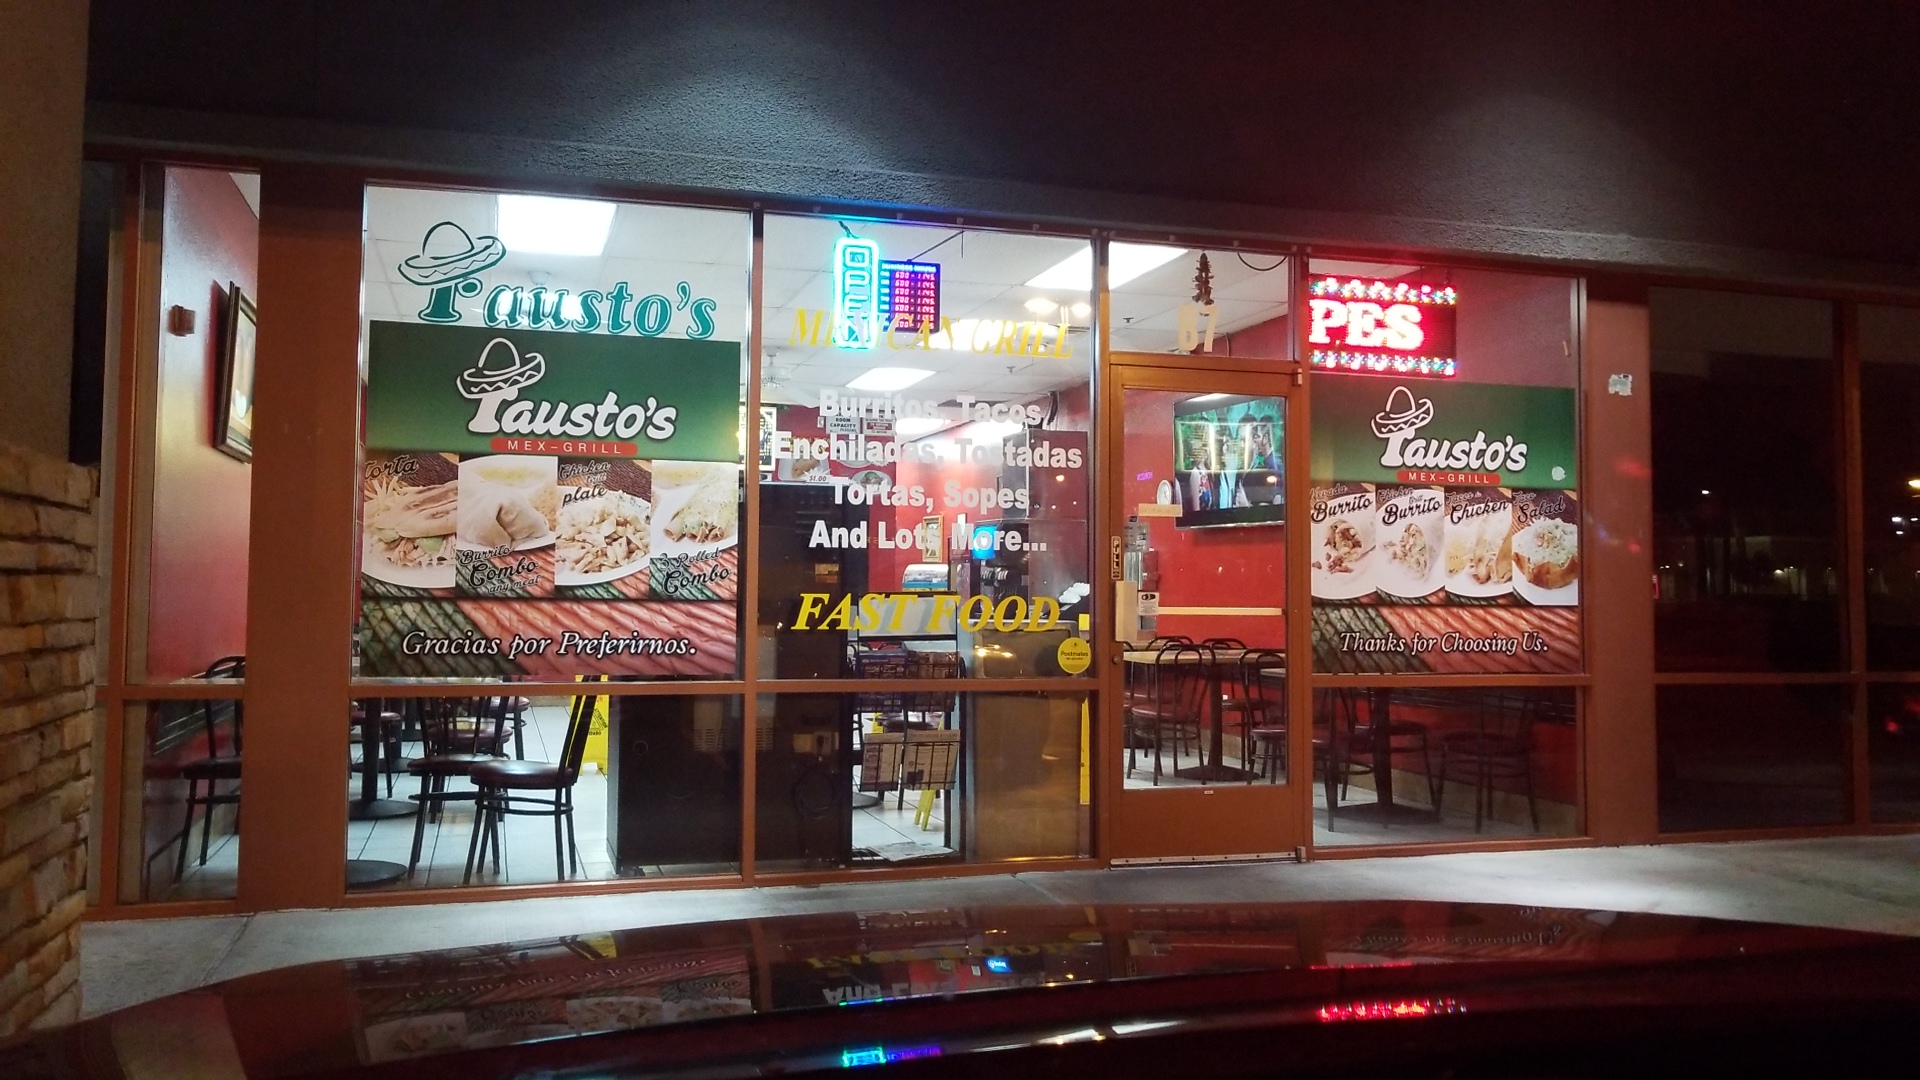 Fausto's Mexican Grill